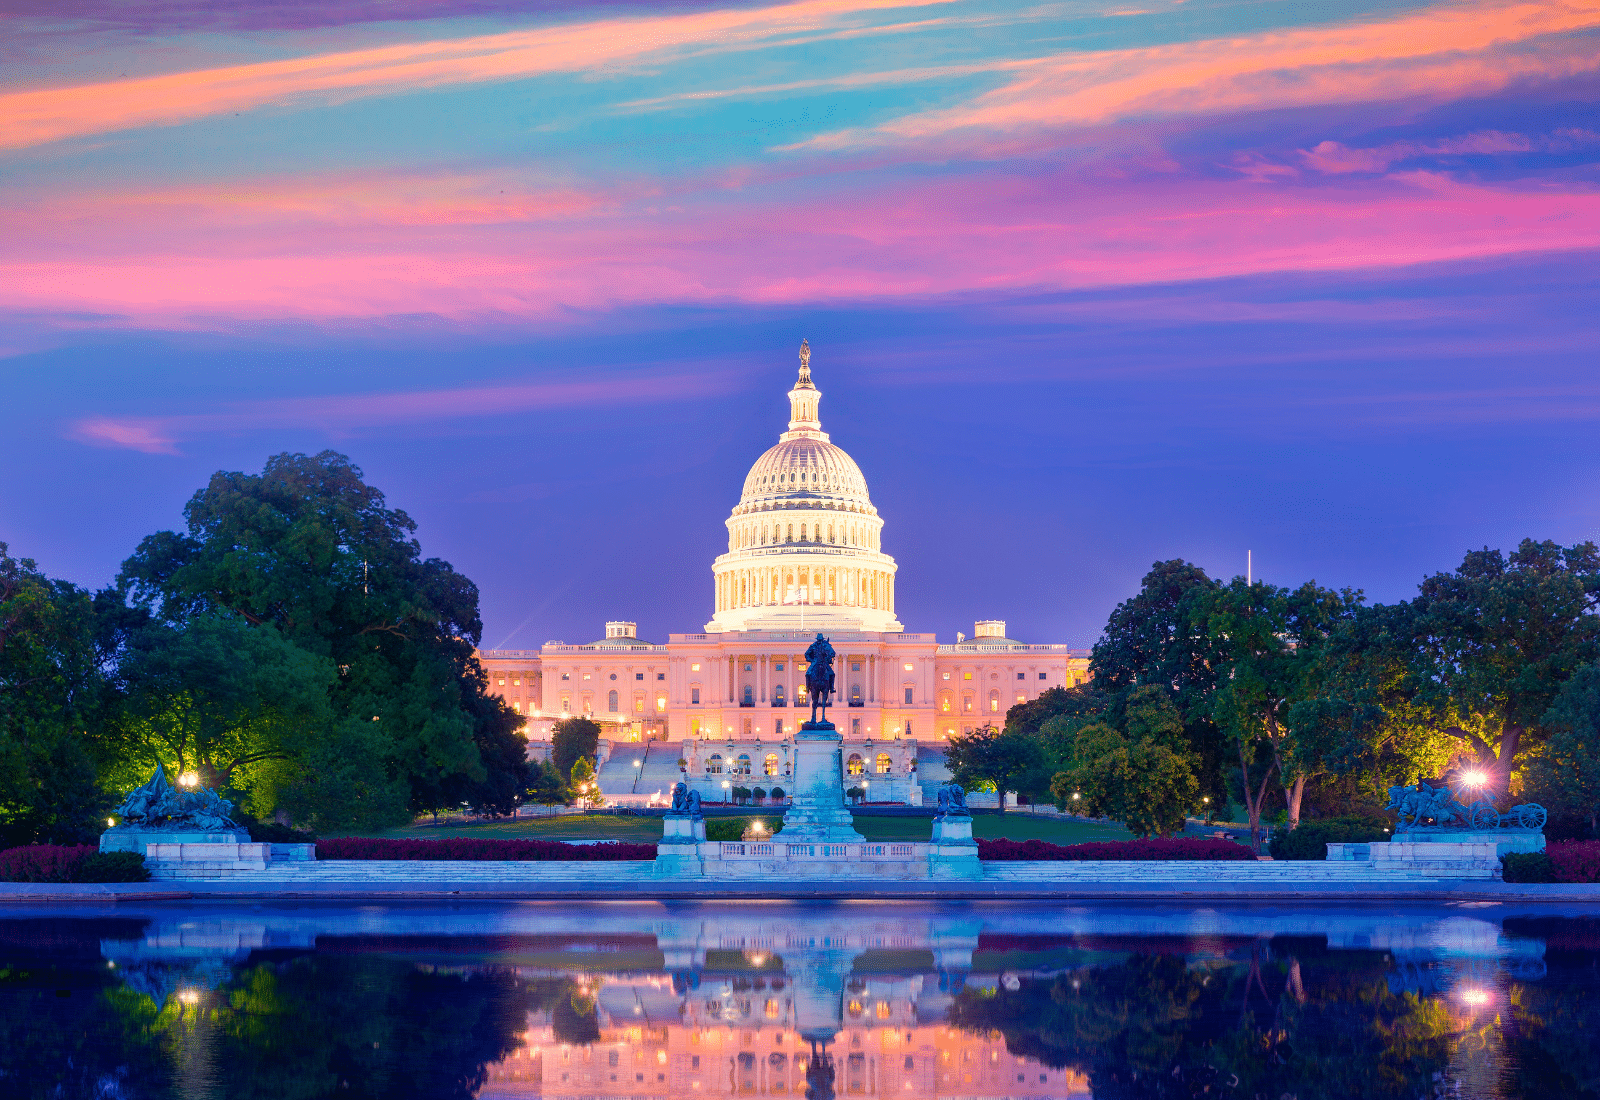 Image of the capitol building